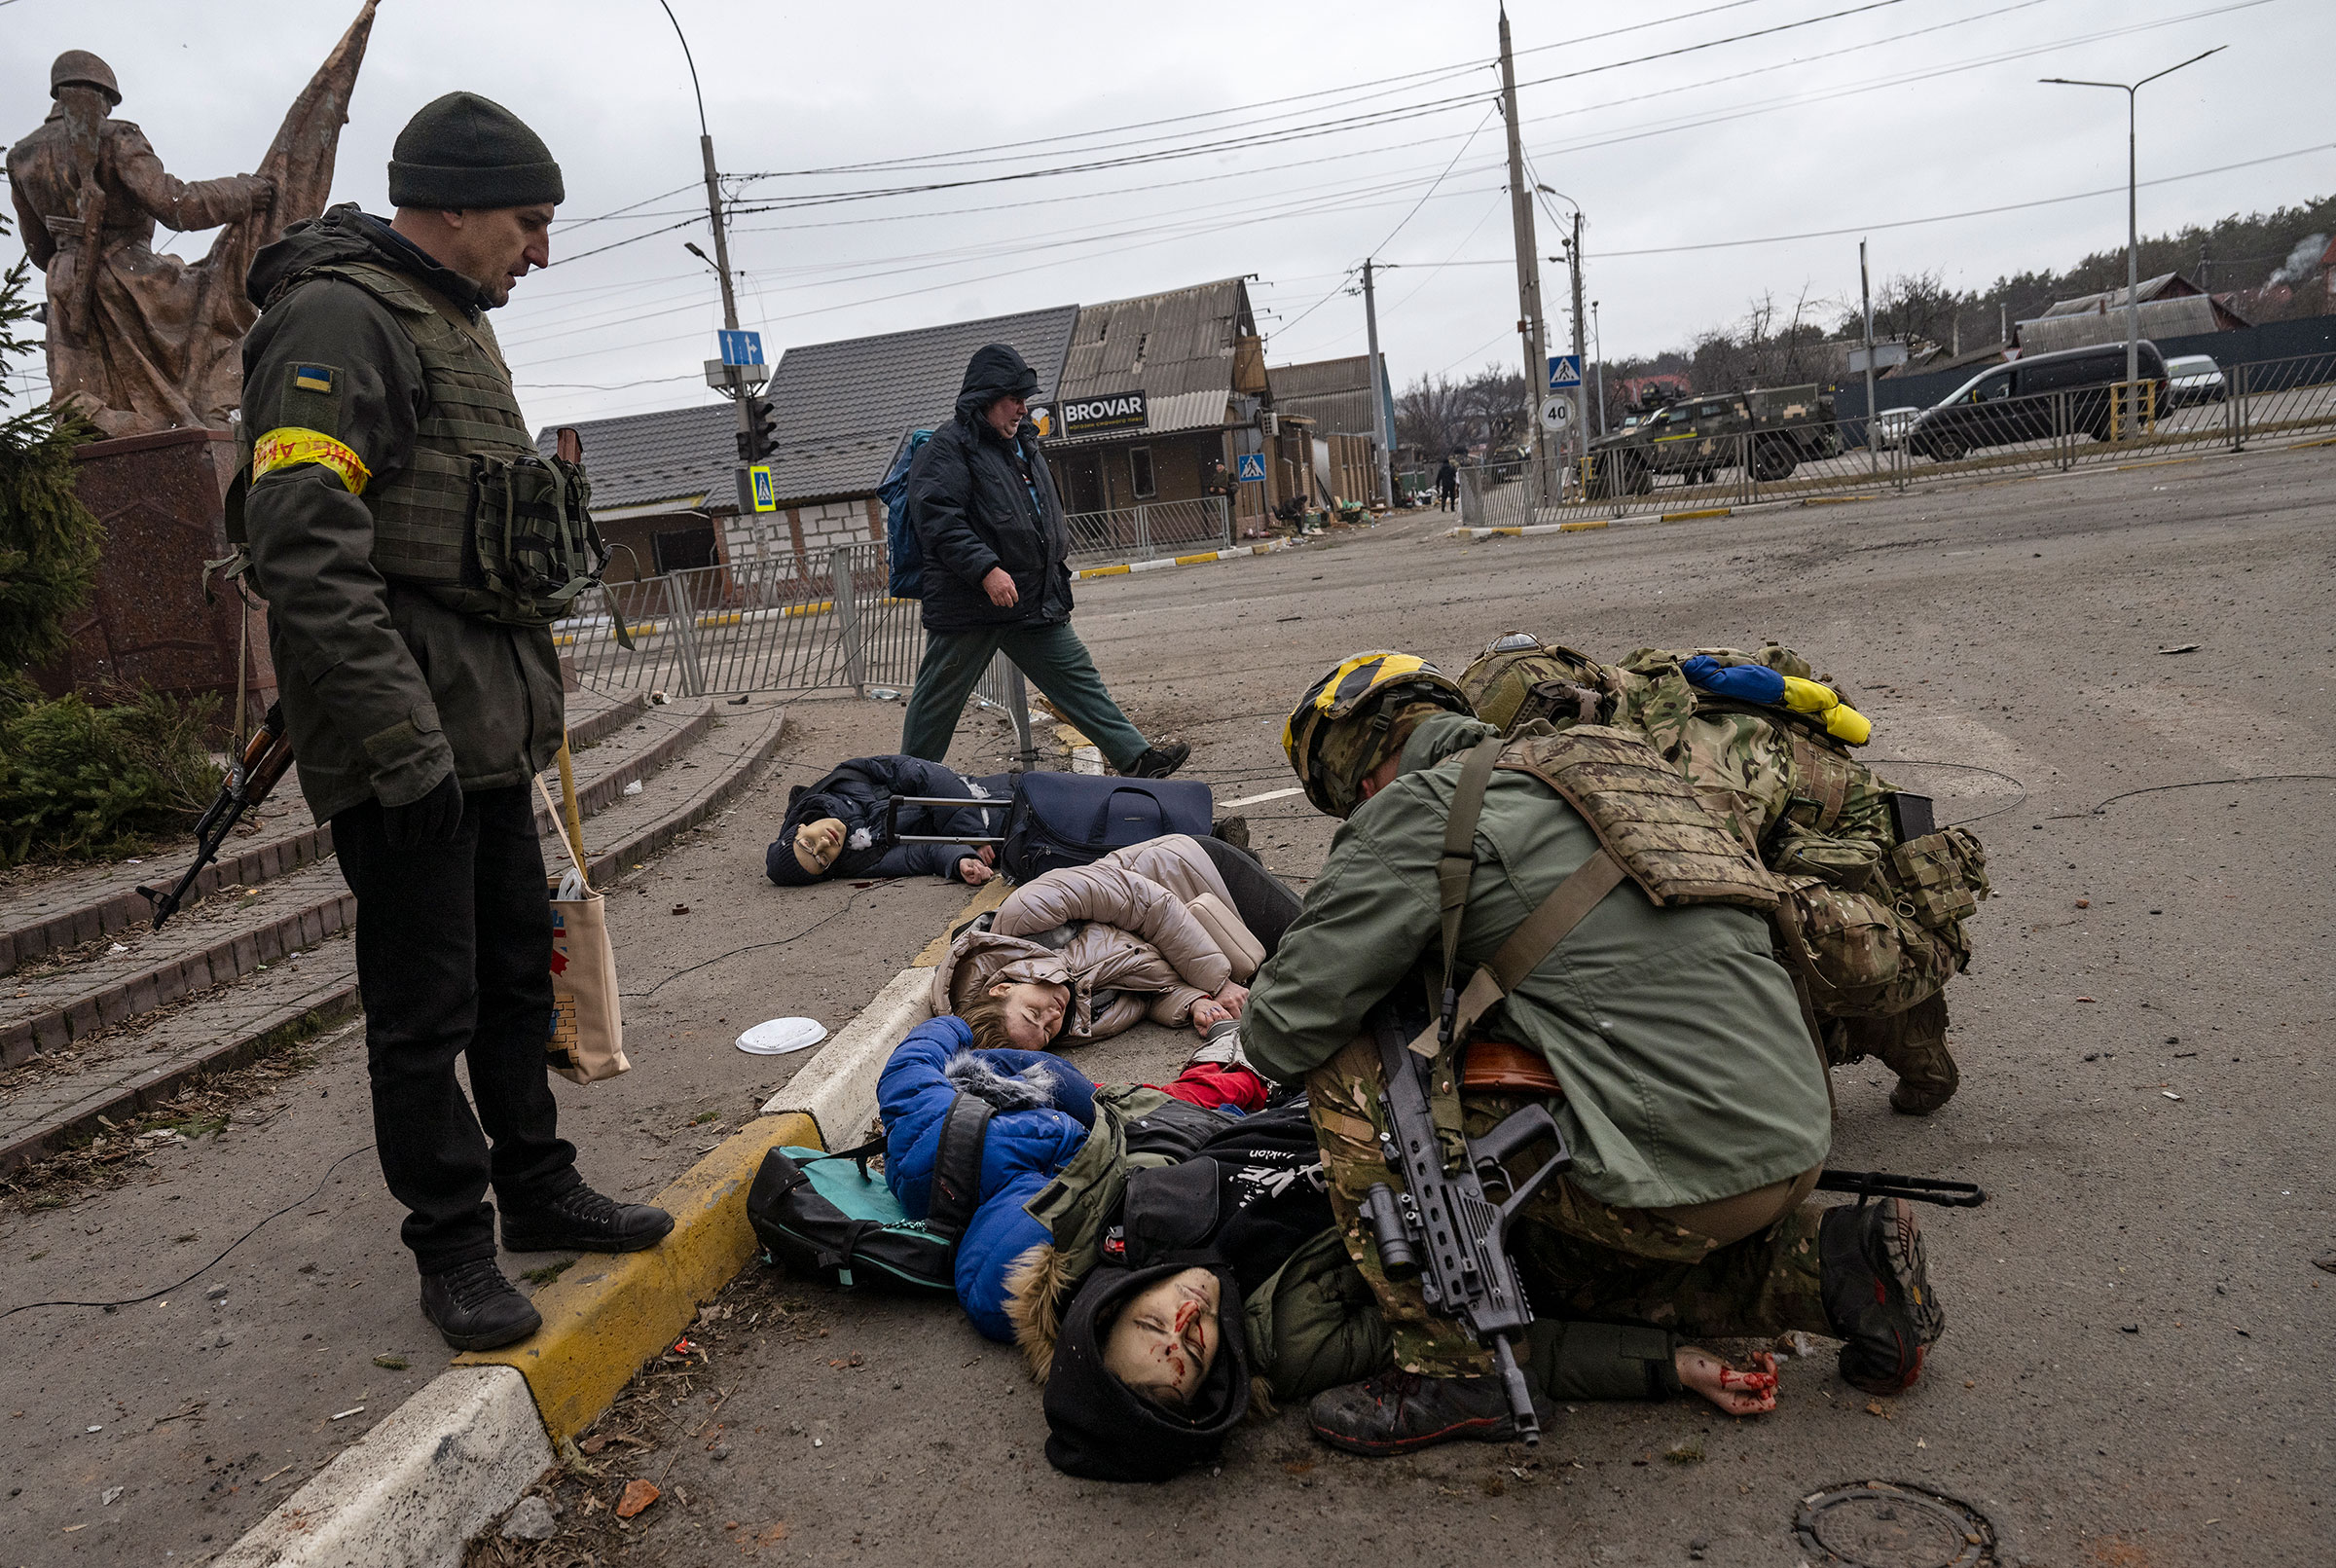 Ukrainian soldiers attend to a group of civilians, including Tetiana Perebyinis and her two children, who were mortally wounded by a Russian mortar round while they evacuated from Irpin, Ukraine, on March 6. A volunteer assisting the family was also killed.